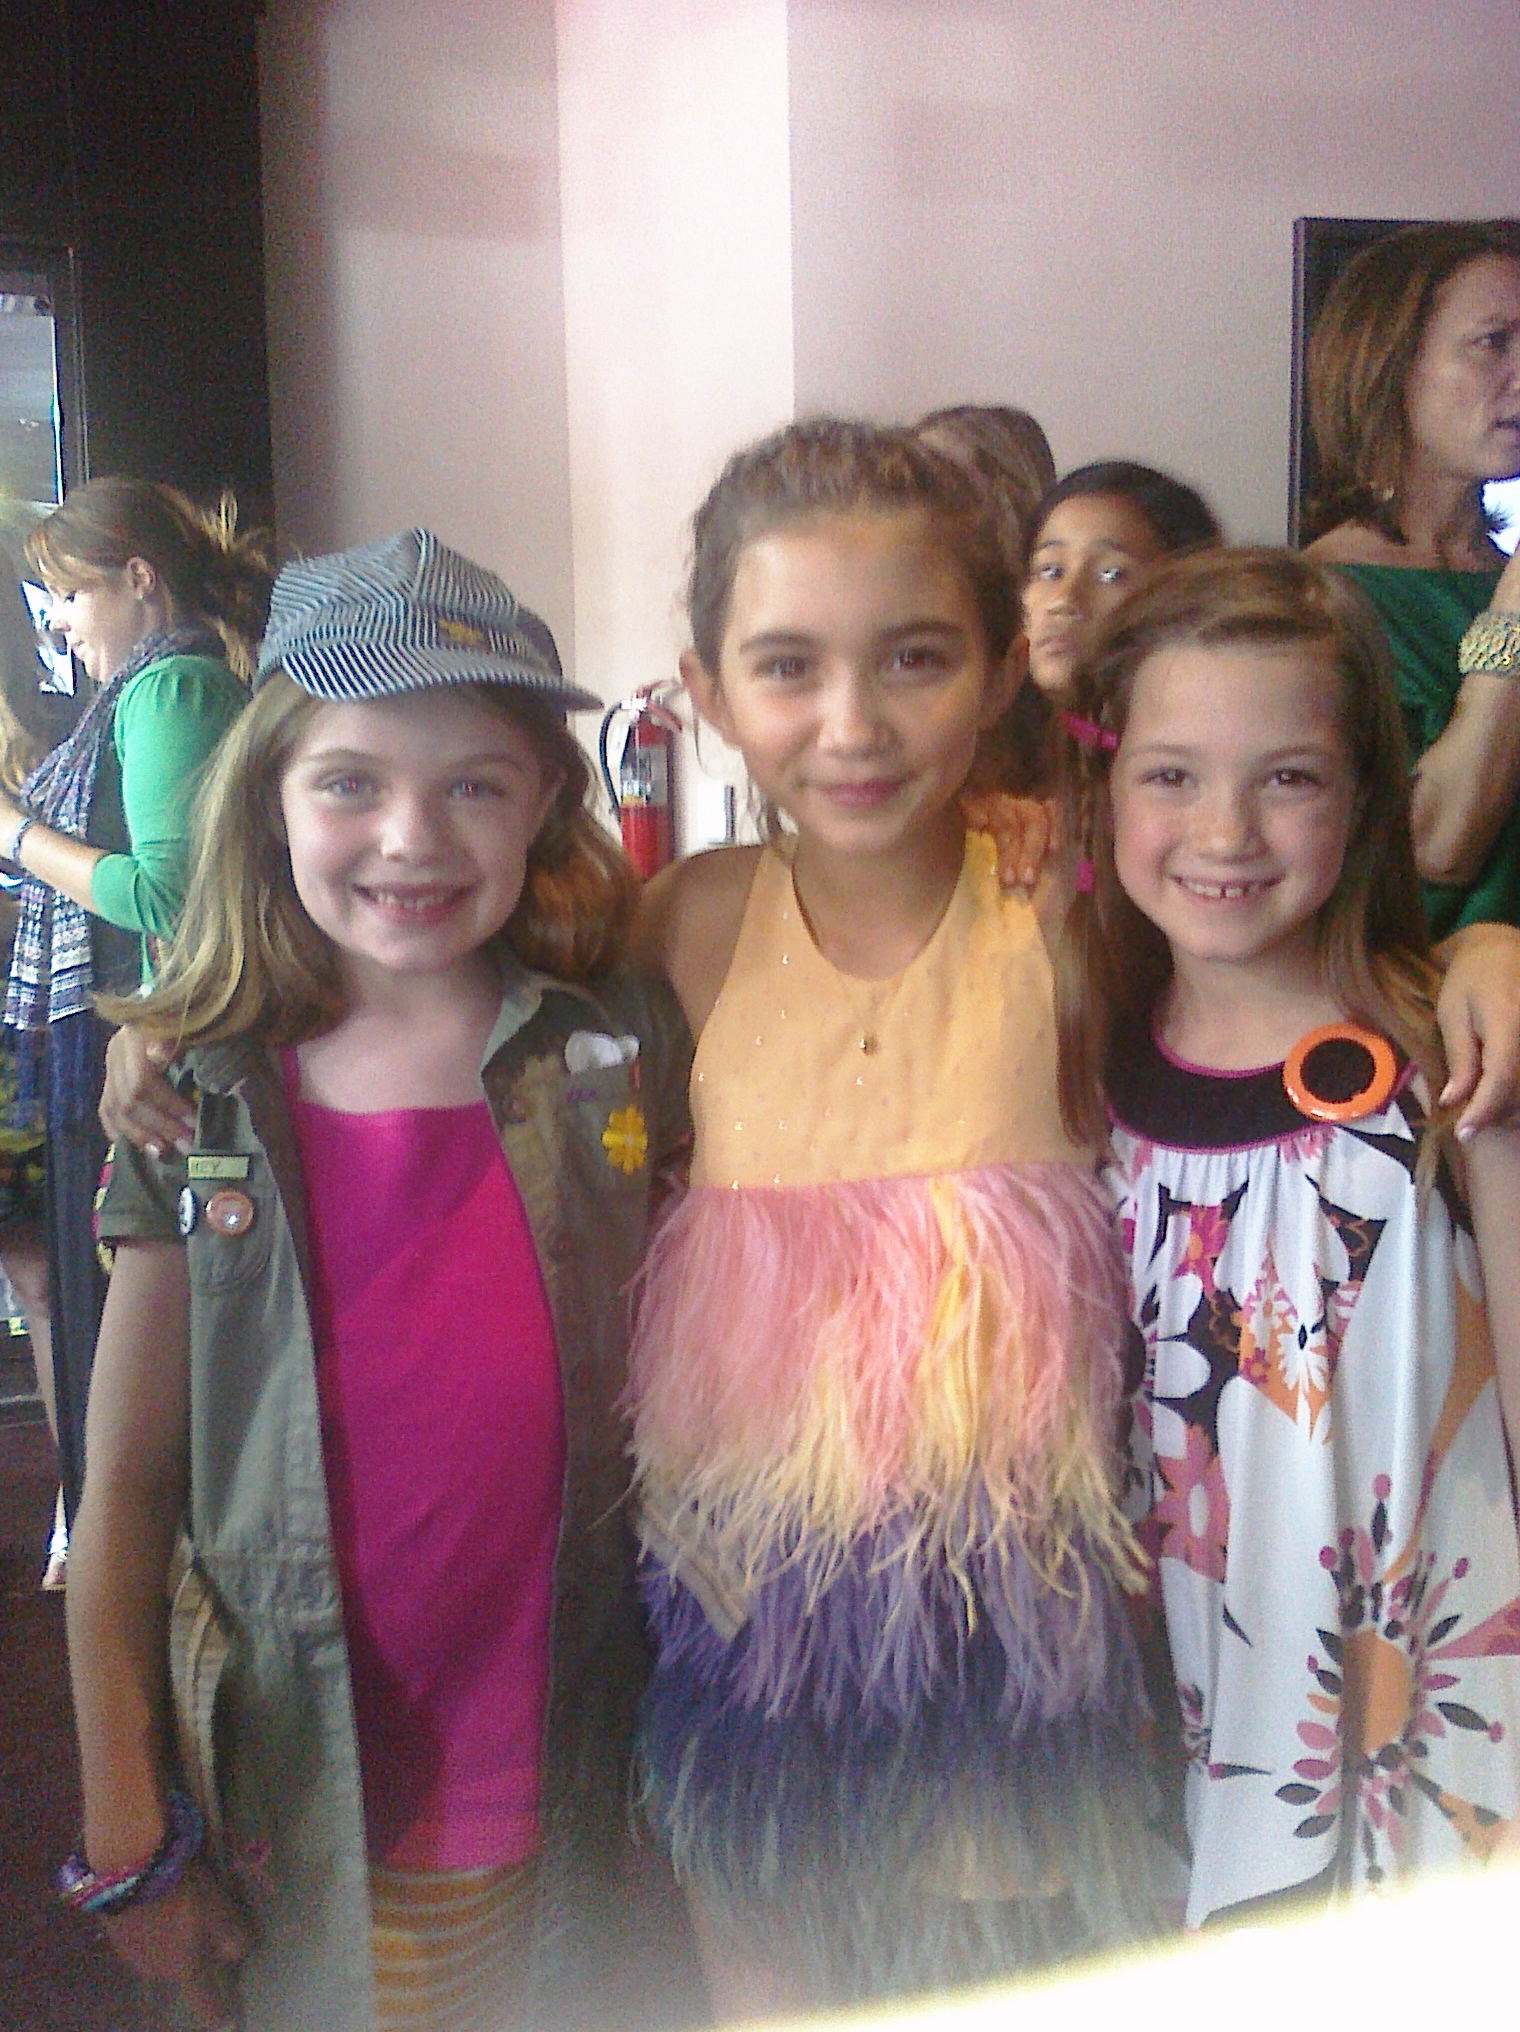 Olivia Shea with Madison Moellers and Rowan Blanchard at the Spy Kids 4D premiere.